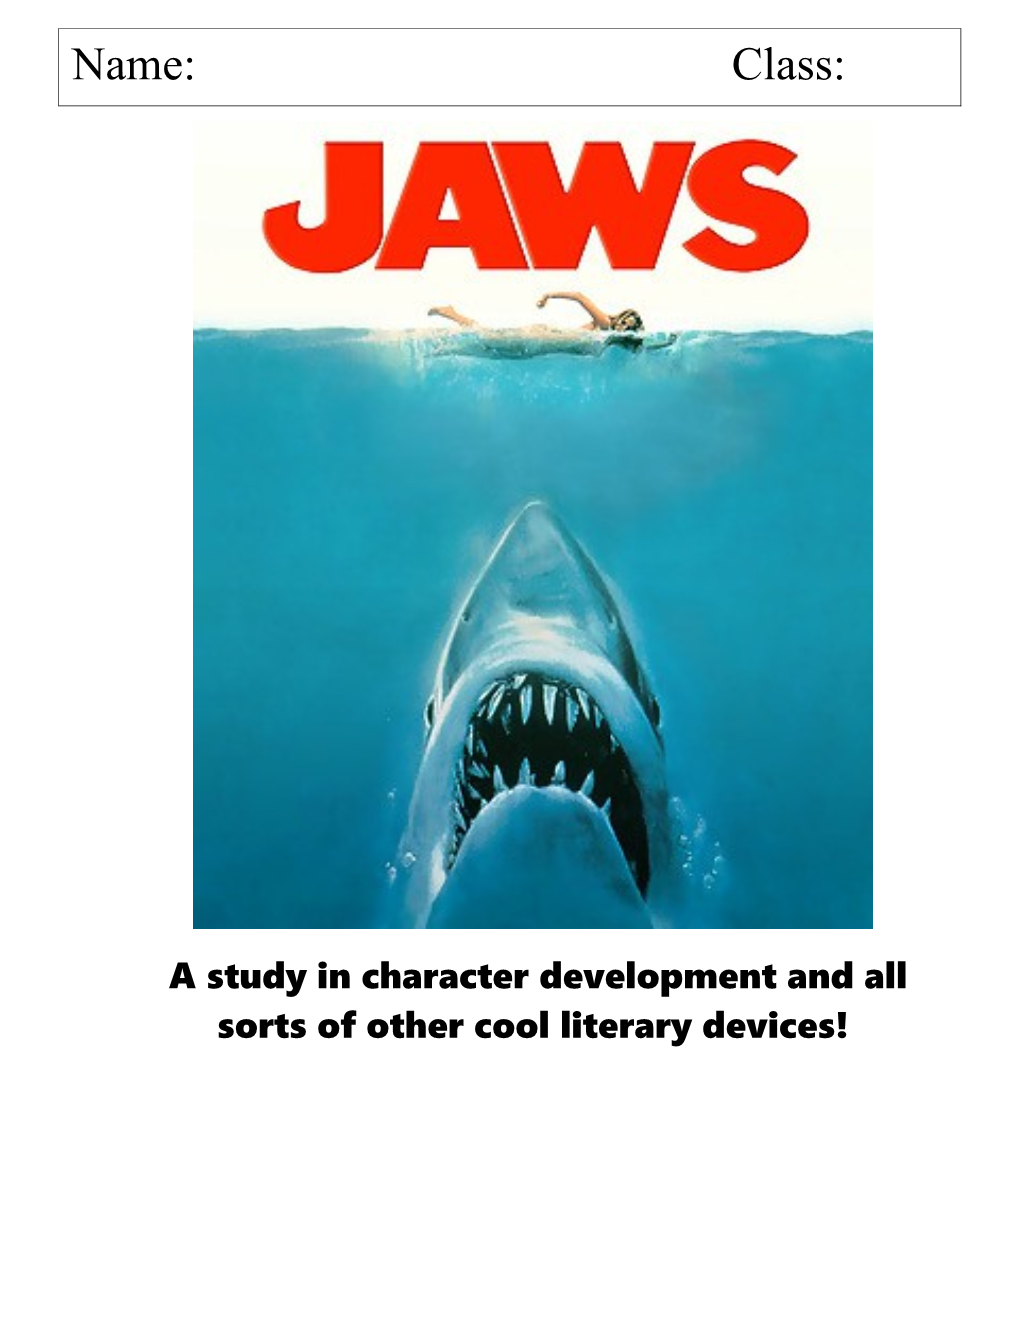 JAWS a Study in Character Development, and All Sort of Other Cool Literary Devices